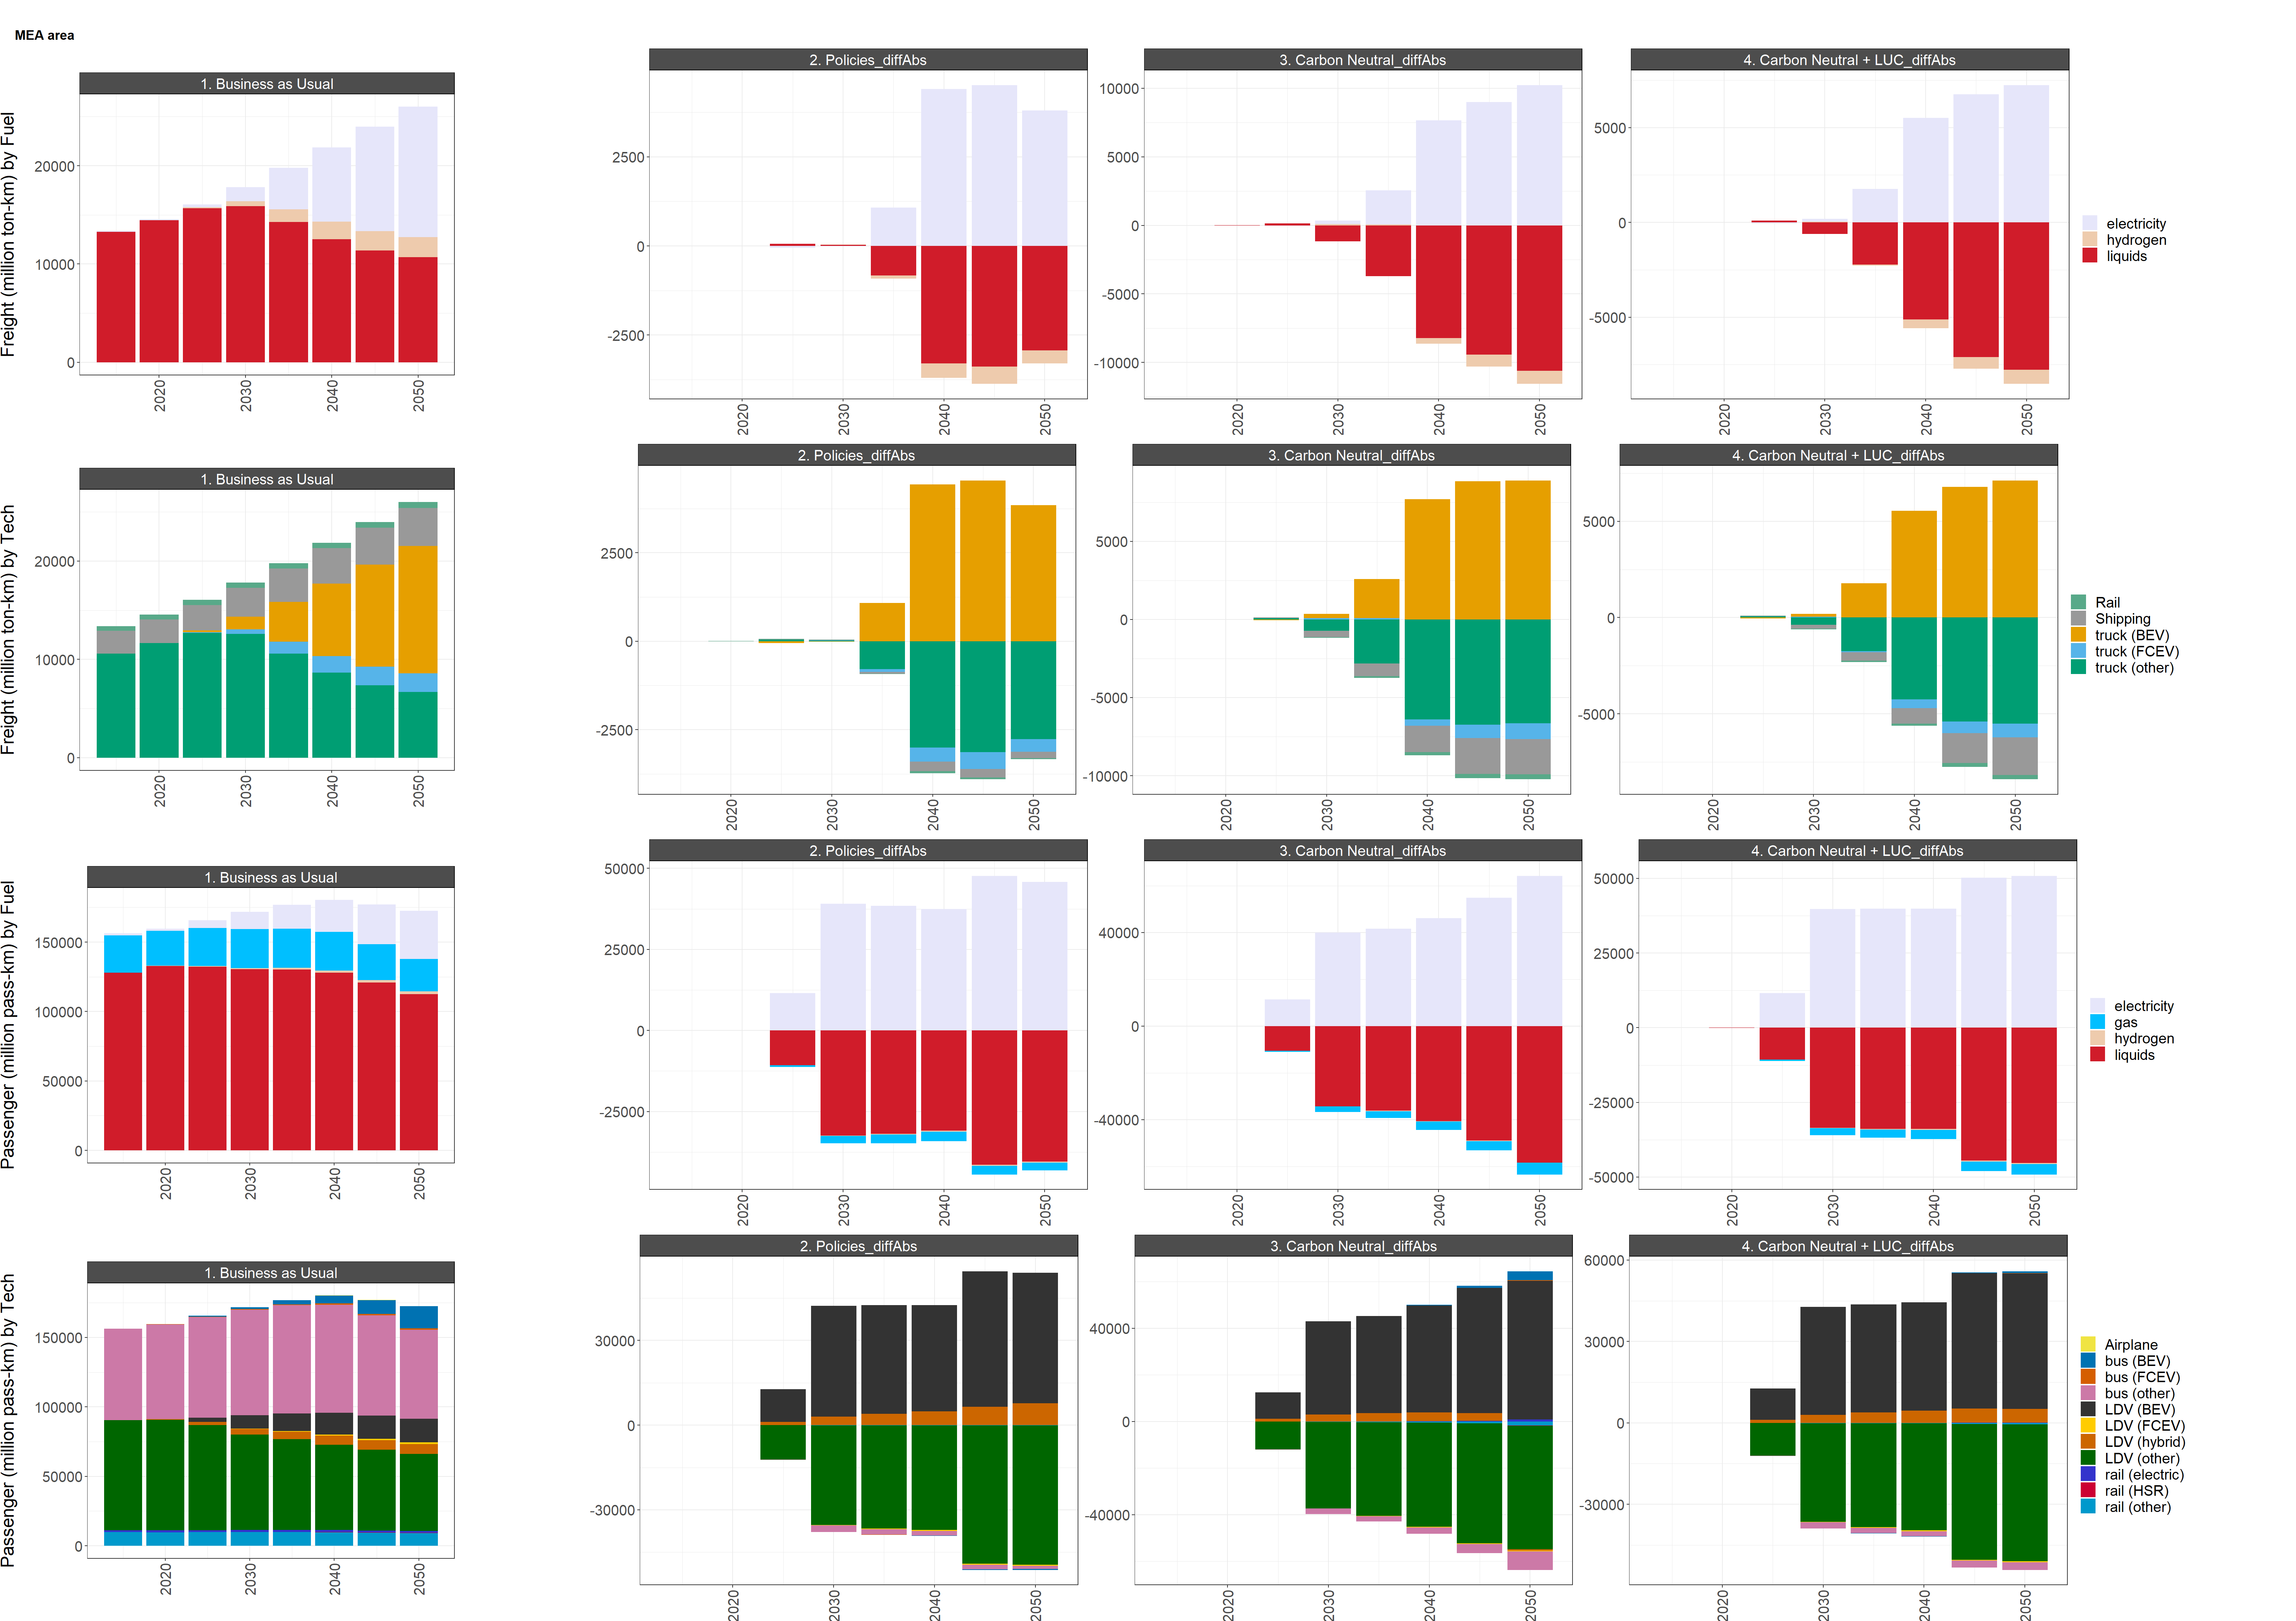 Difference in MEA area transportation GHG emissions by mode and service output by mode and fuel between the reference scenario (left) and the low and high policy scenarios (right)